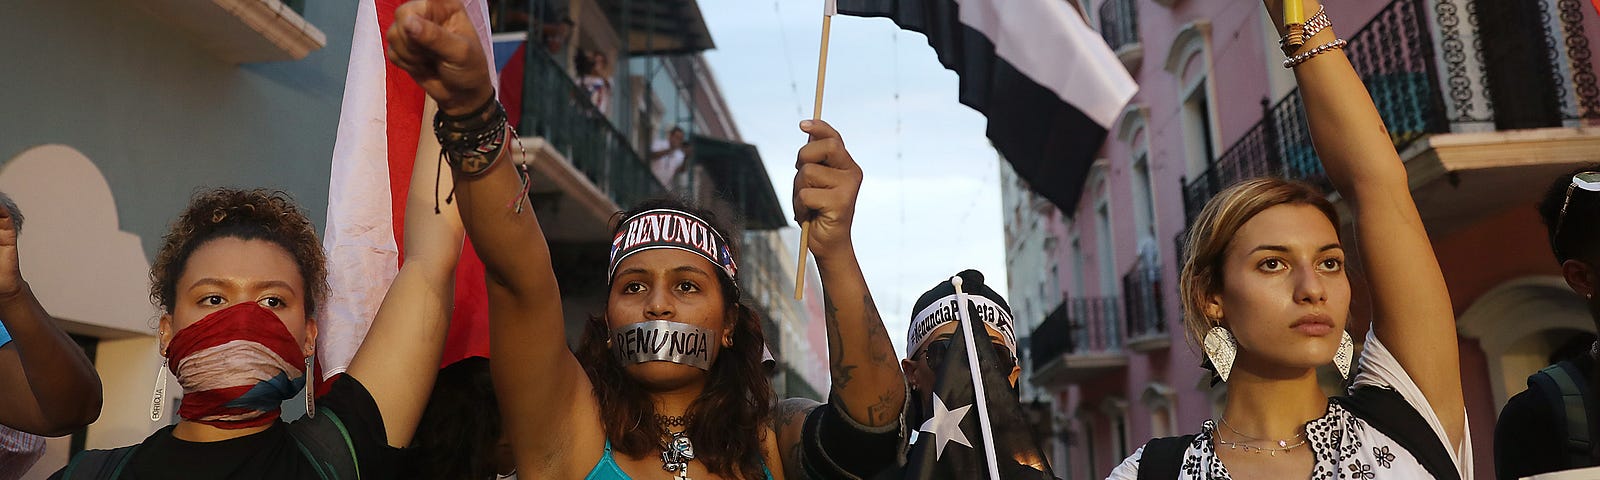 JULY 19, 2019: Protesters demonstrate against Ricardo Rossello, the Governor of Puerto Rico in San Juan.